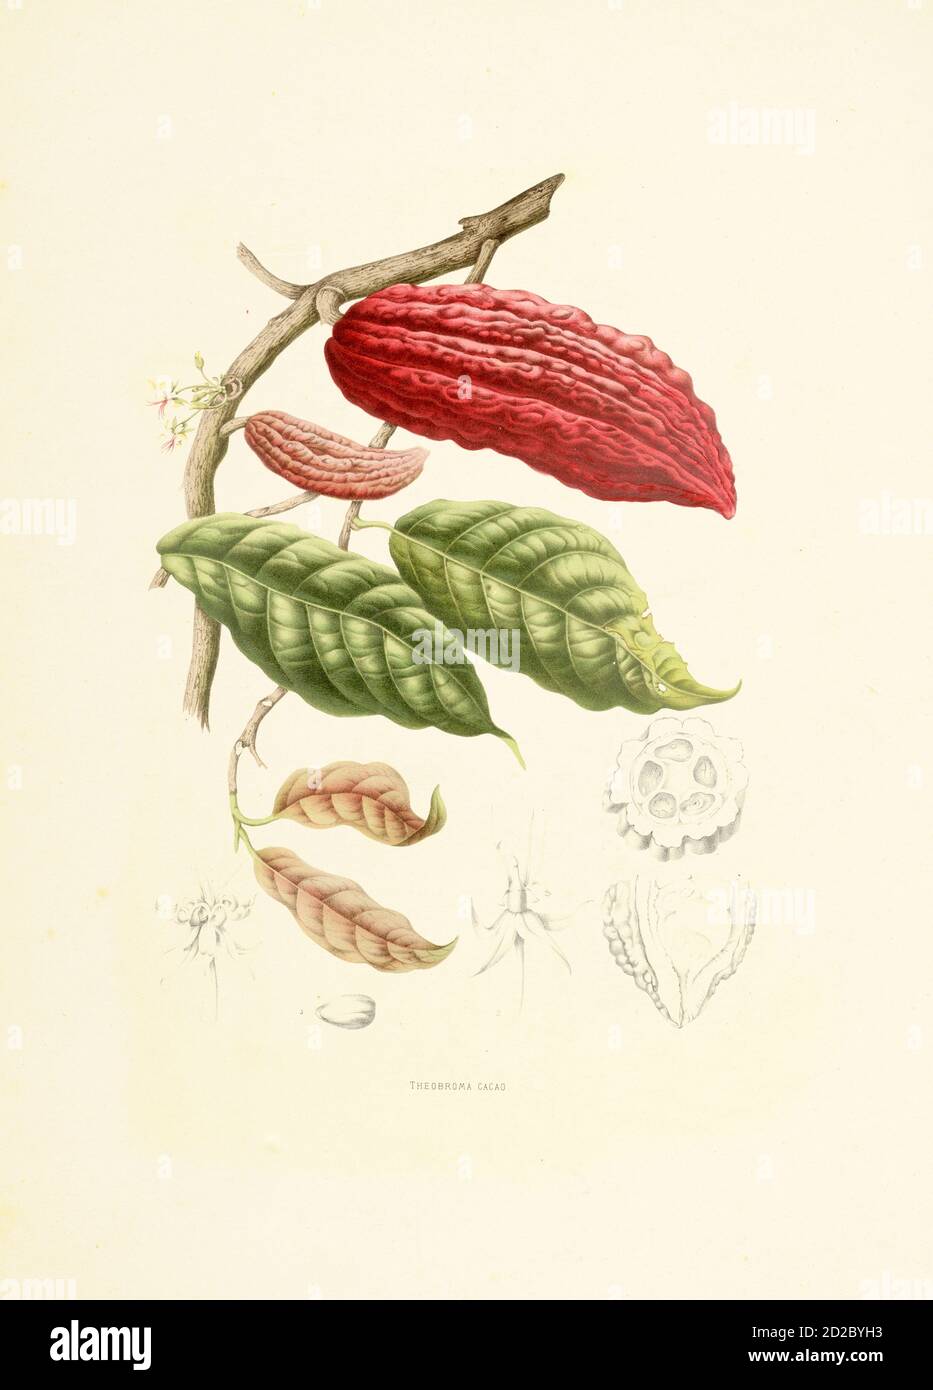 19th-century engraving of a theobroma cacao (also known as cocoa tree or cacao tree). Illustration by Berthe Hoola van Nooten from the book Fleurs, Fr Stock Photo